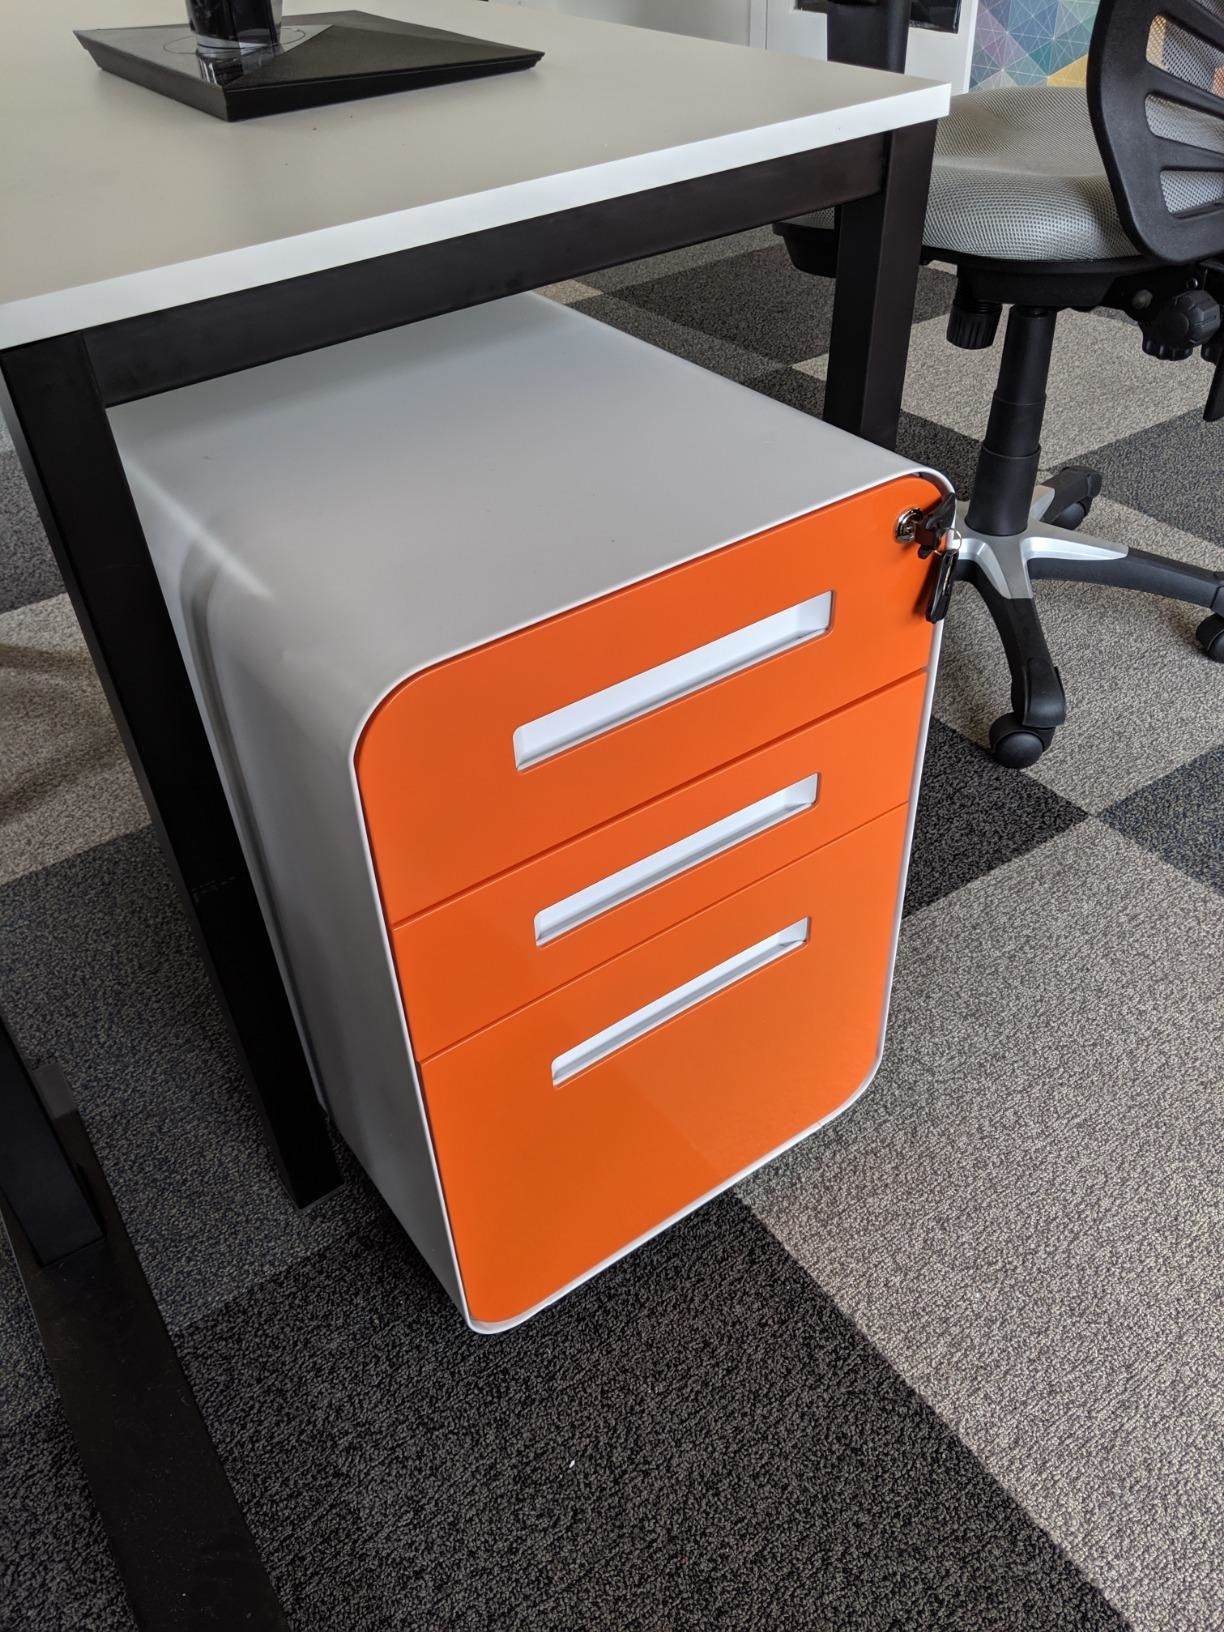 The filing cabinet in white and orange